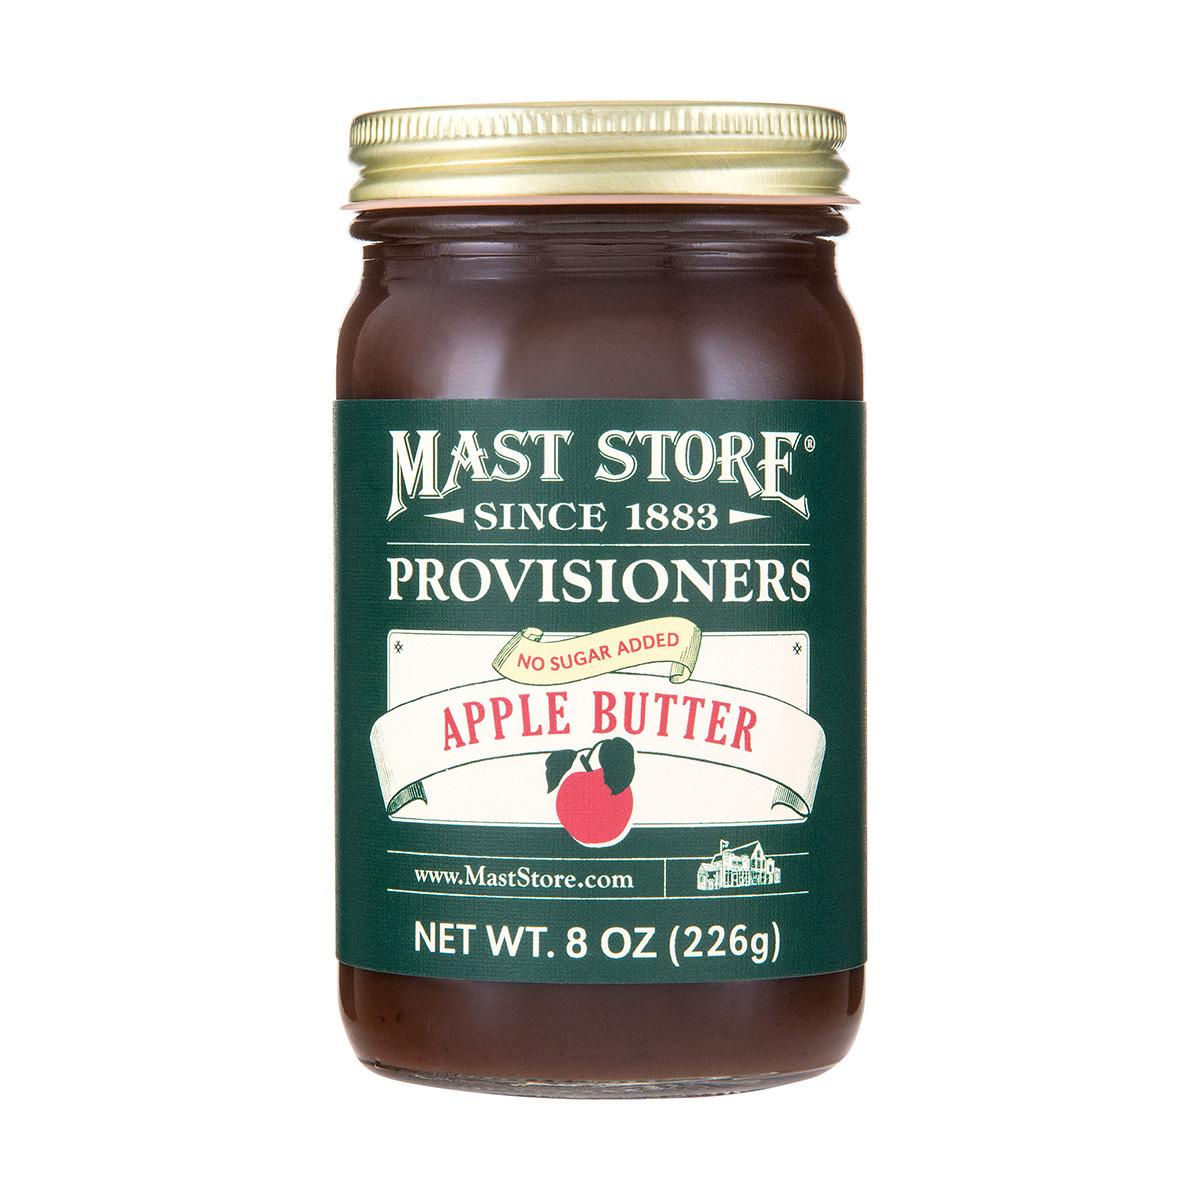  Mast Store Provisioners Apple Butter - No Sugar Added - Half Pint